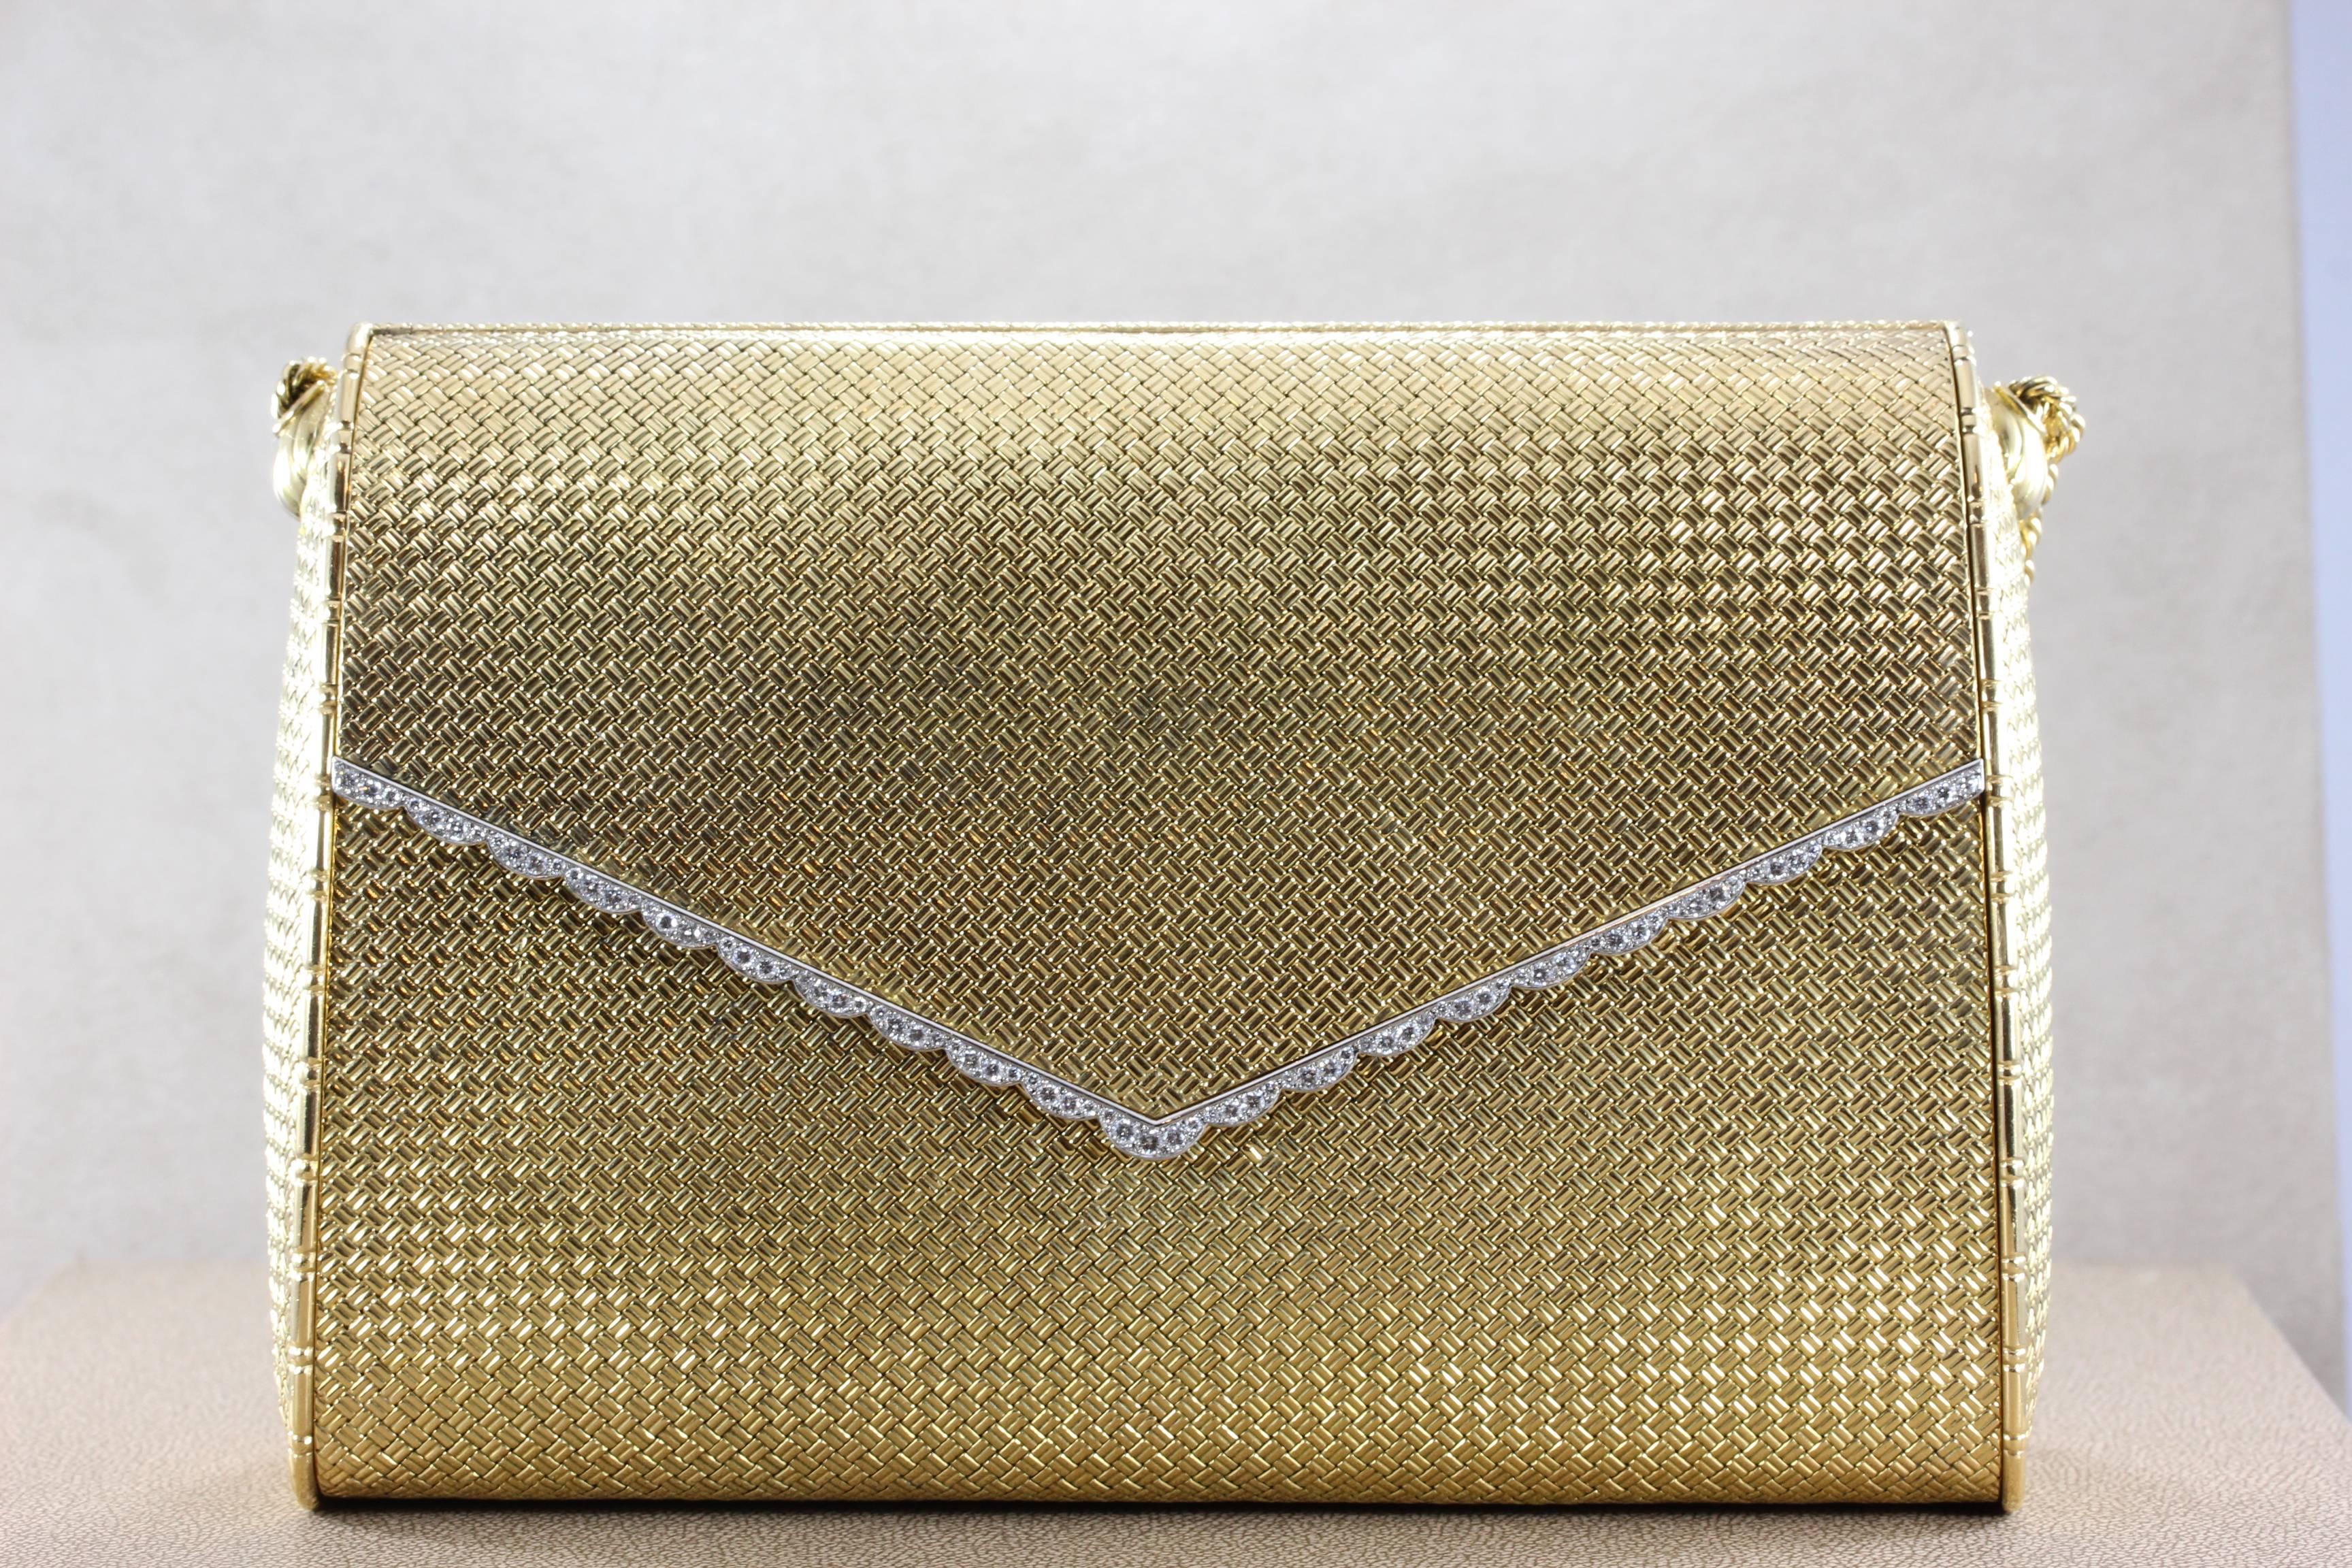 A special piece made in Cartier's Paris workshops, a diamond studded gold evening purse. In excellent condition, this purse opens to reveal a mirror and more storage space than expected. A rare piece by the kings of jewelry, impress and feel like a